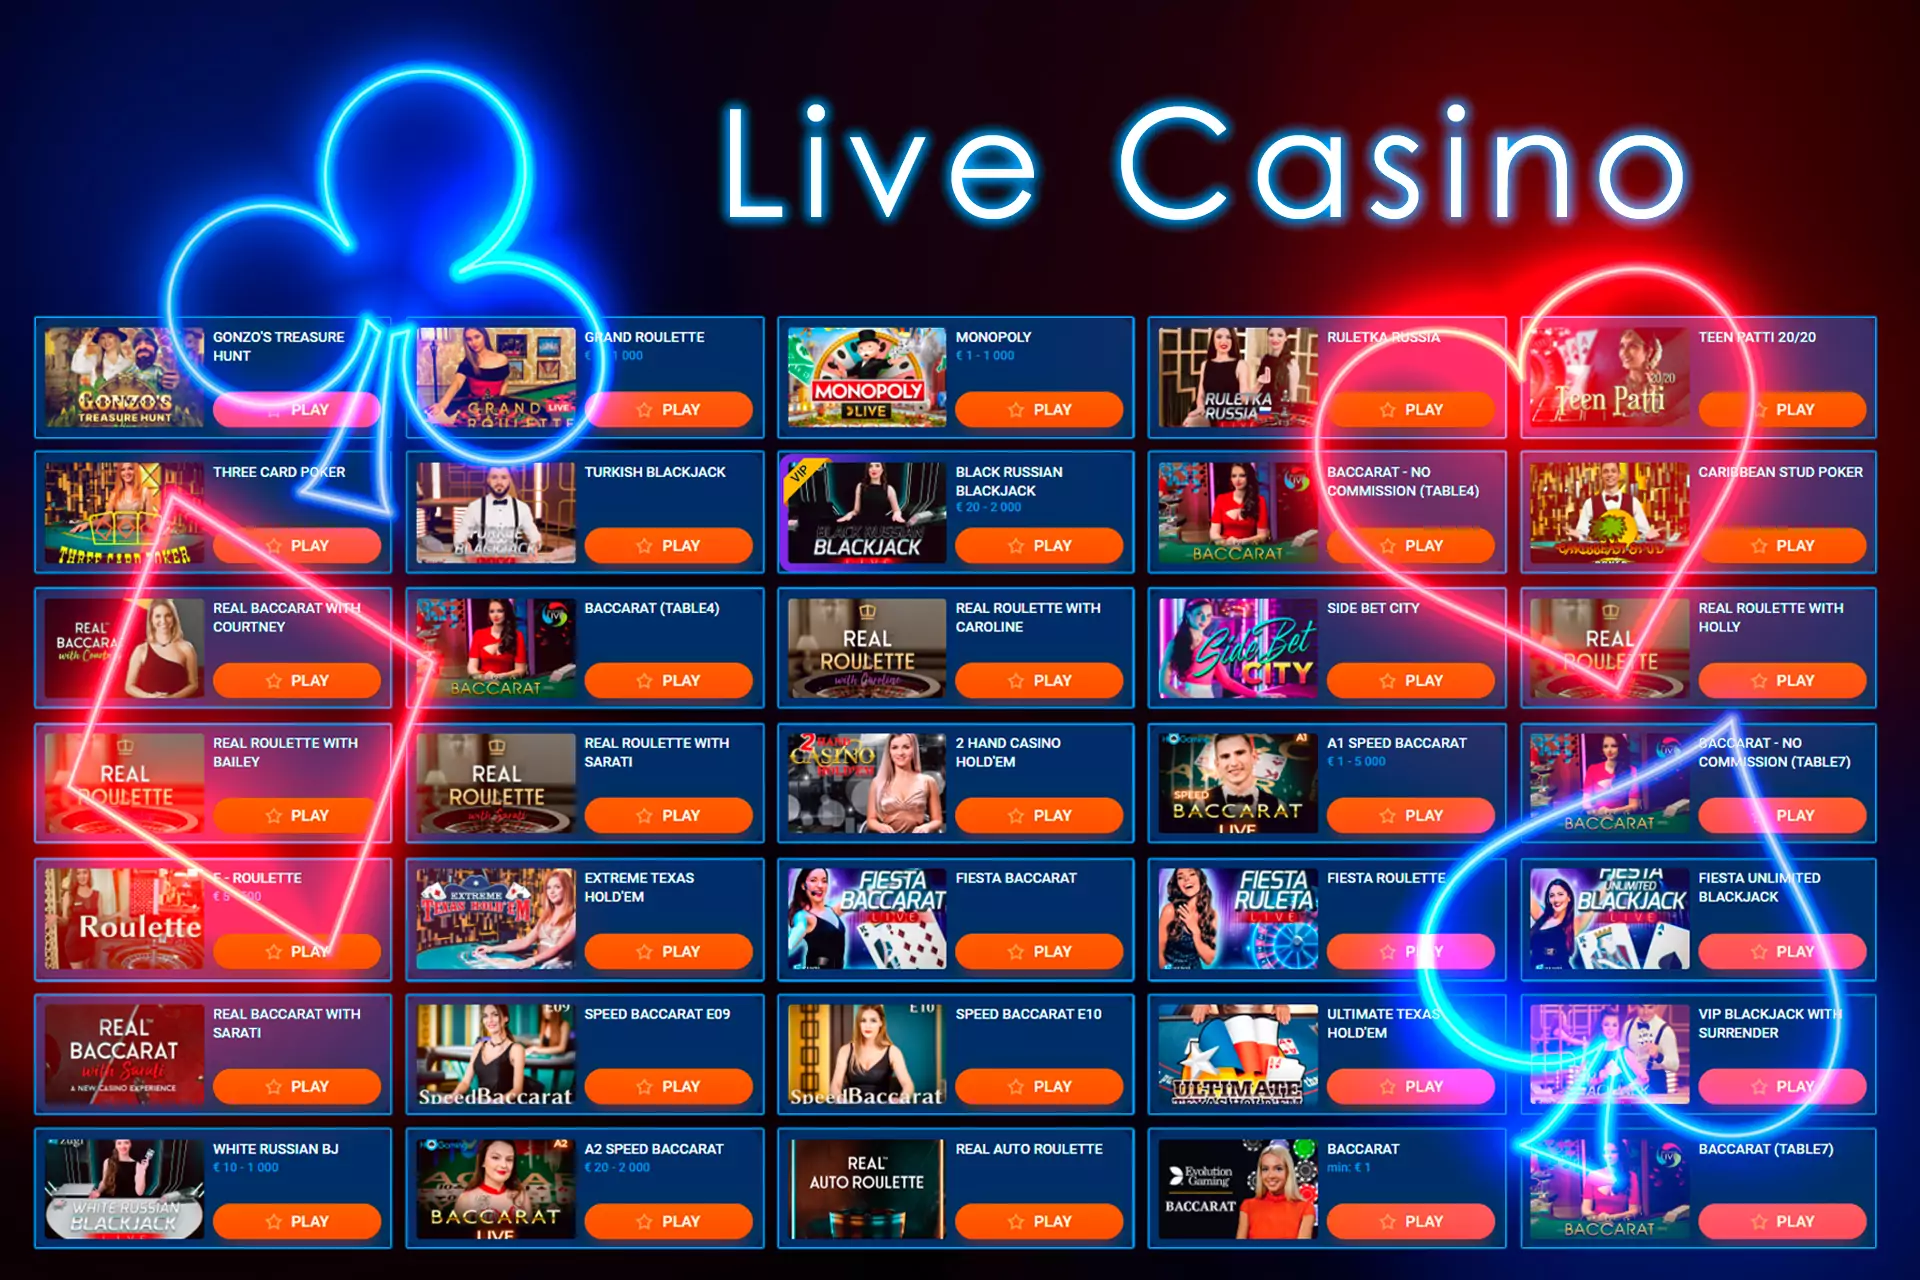 In the Live Casino section, you can play table games with a live dealer.